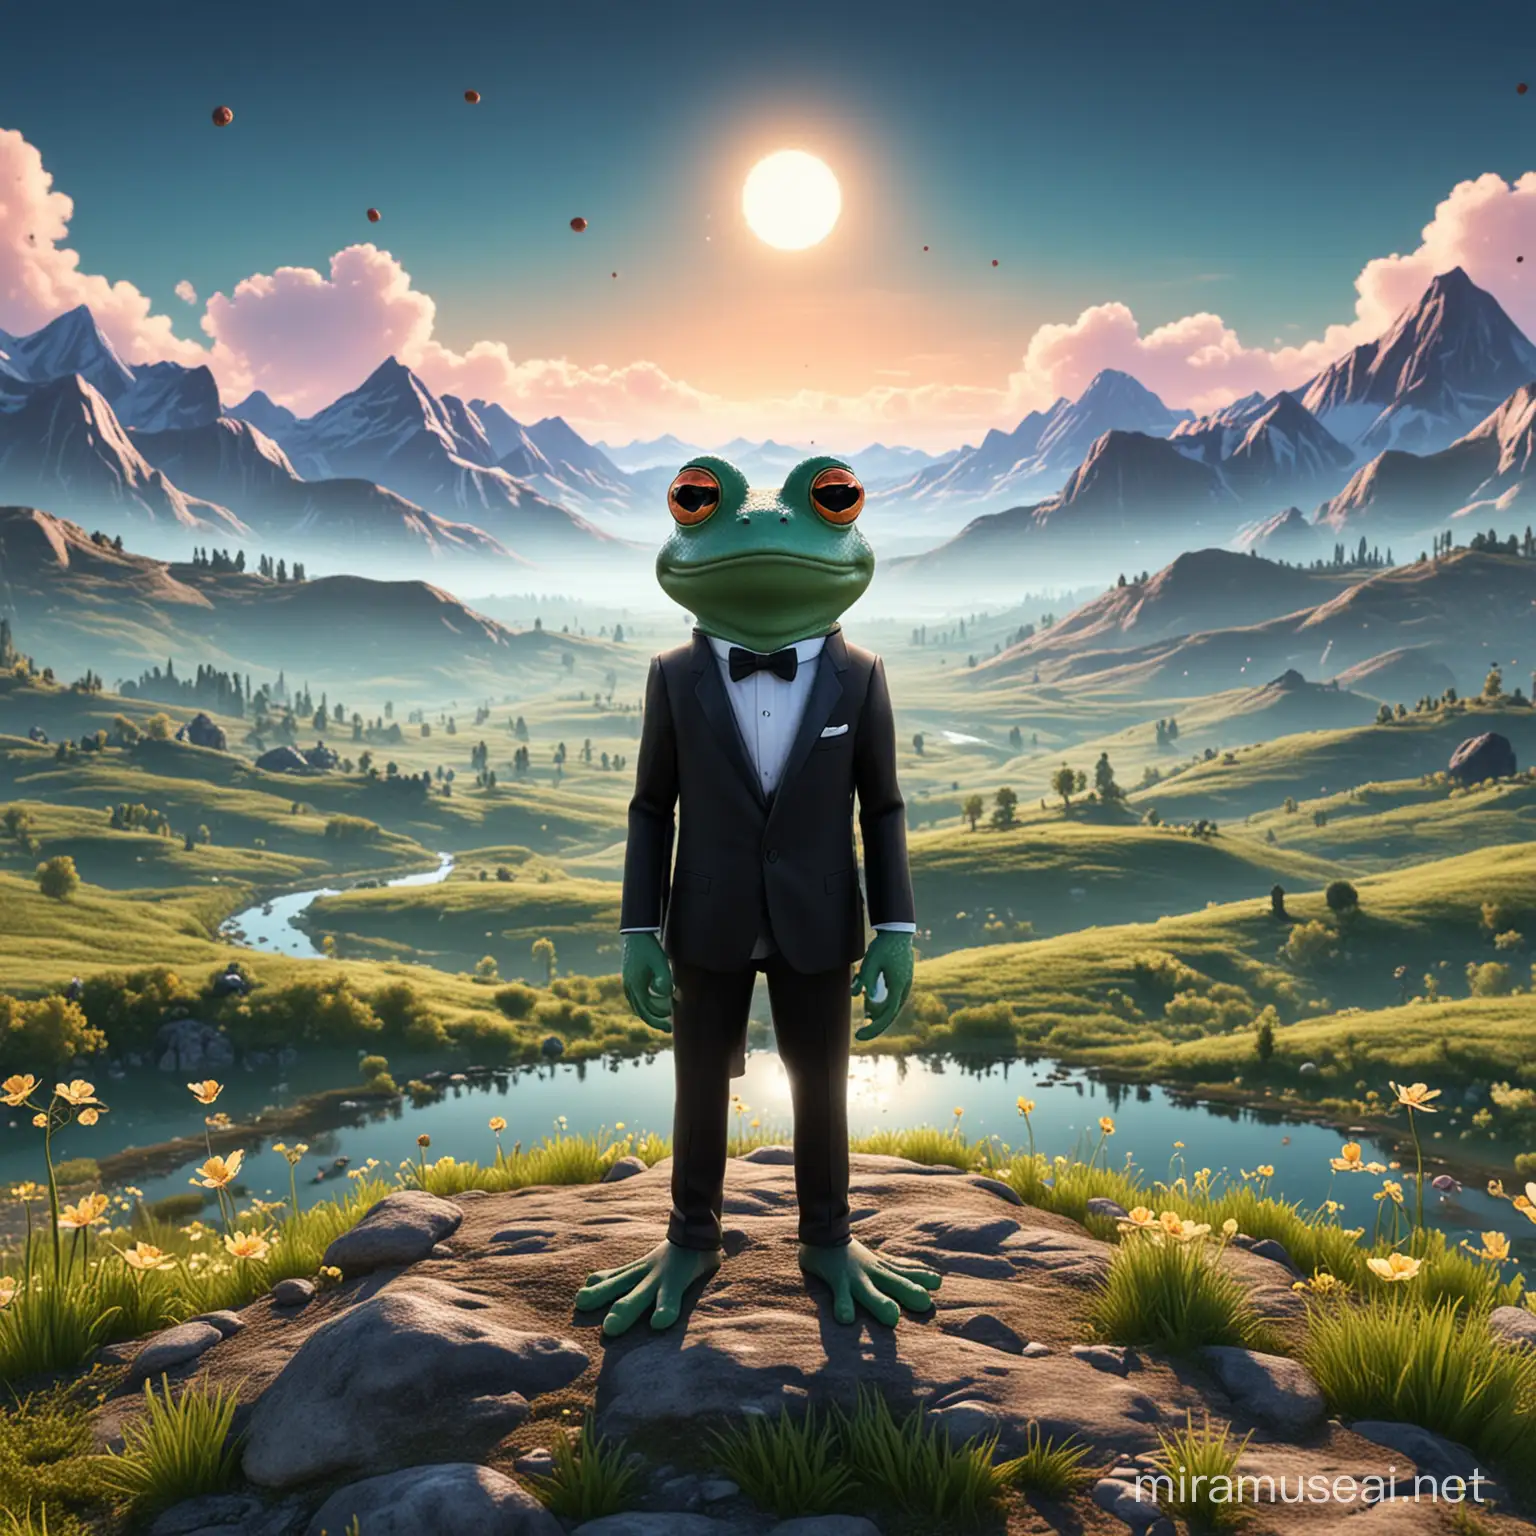 The Scenery of Digital Valley , Digital Valley
cartoon Virus frogs dressed in tuxedos Virus stands at the peak of Digital Valley, admiring the beautiful scenery against the backdrop of a dazzling digital world.
His eyes shimmer with curiosity, as if anticipating a new adventure.
